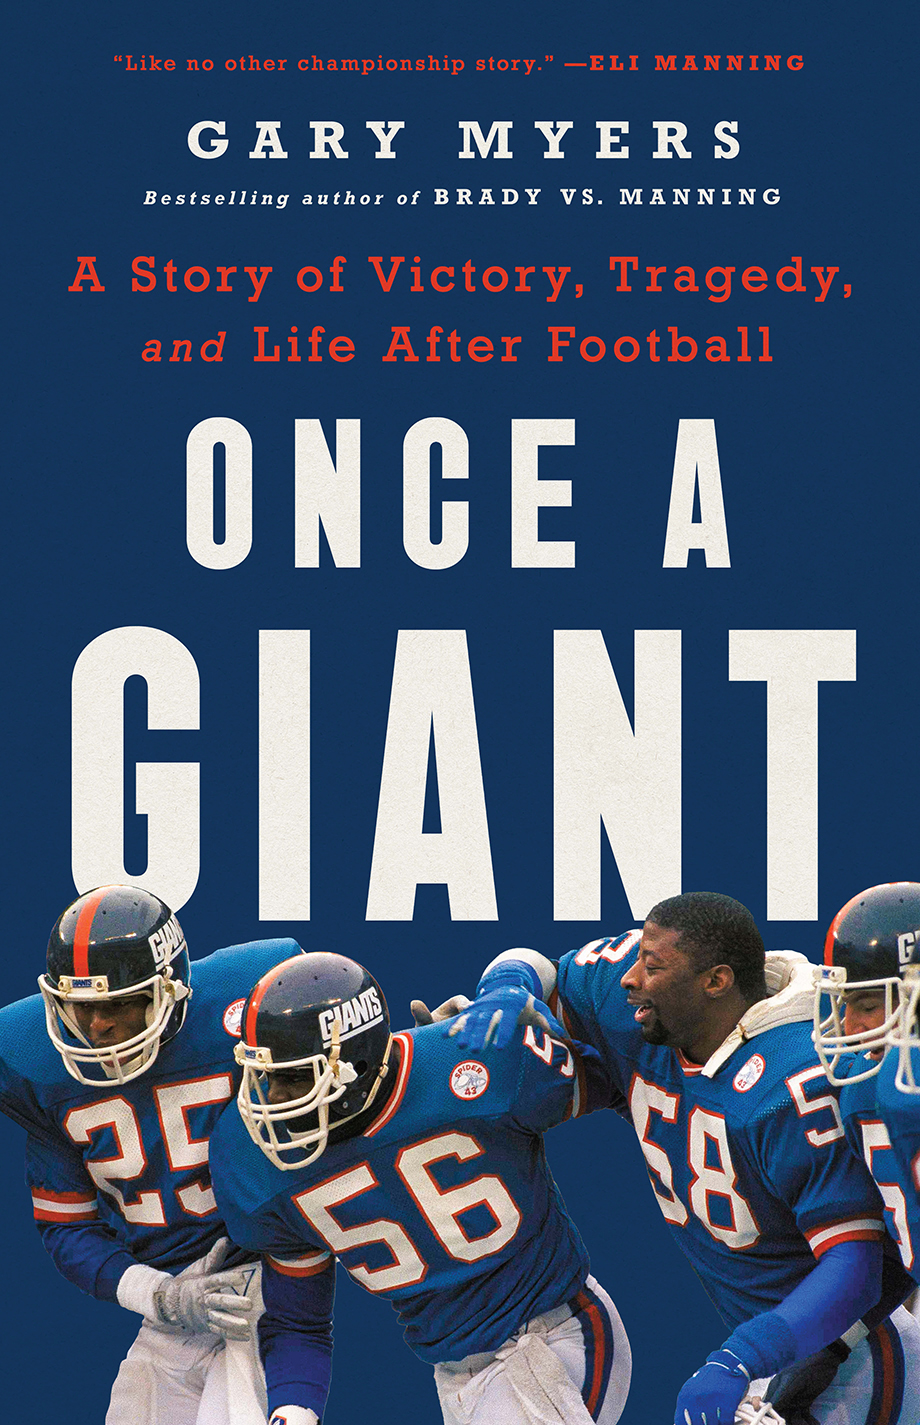 Once a Giant by Gary Myers